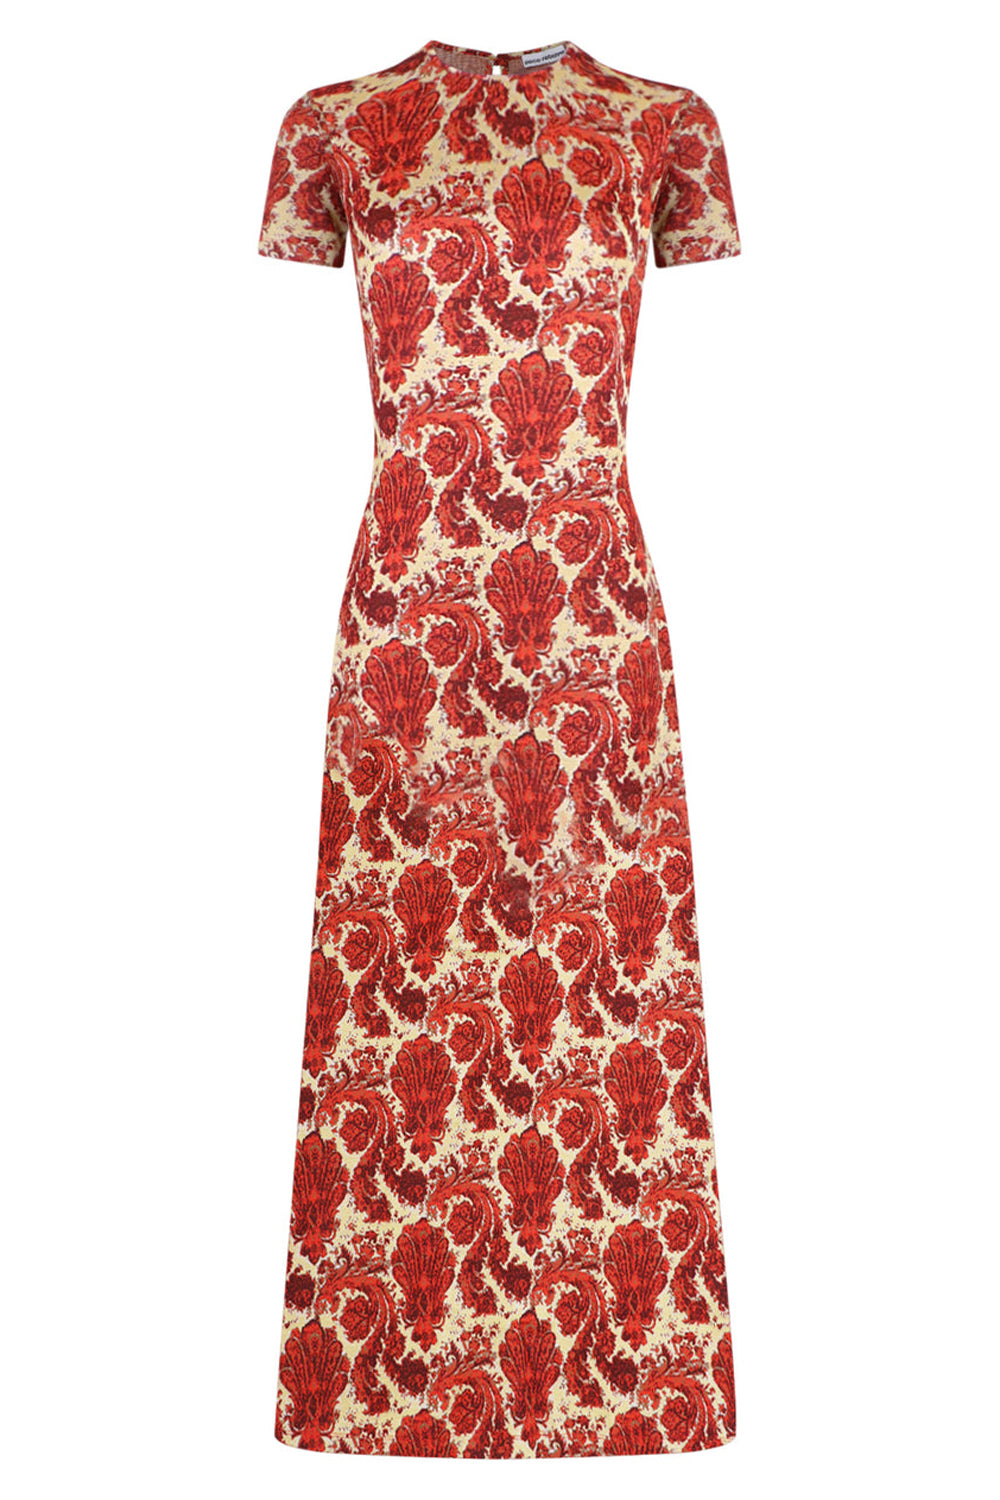 PACO RABANNE DRESSES TAPESTRY PRINT MAXI DRESS | GRUNGE RED